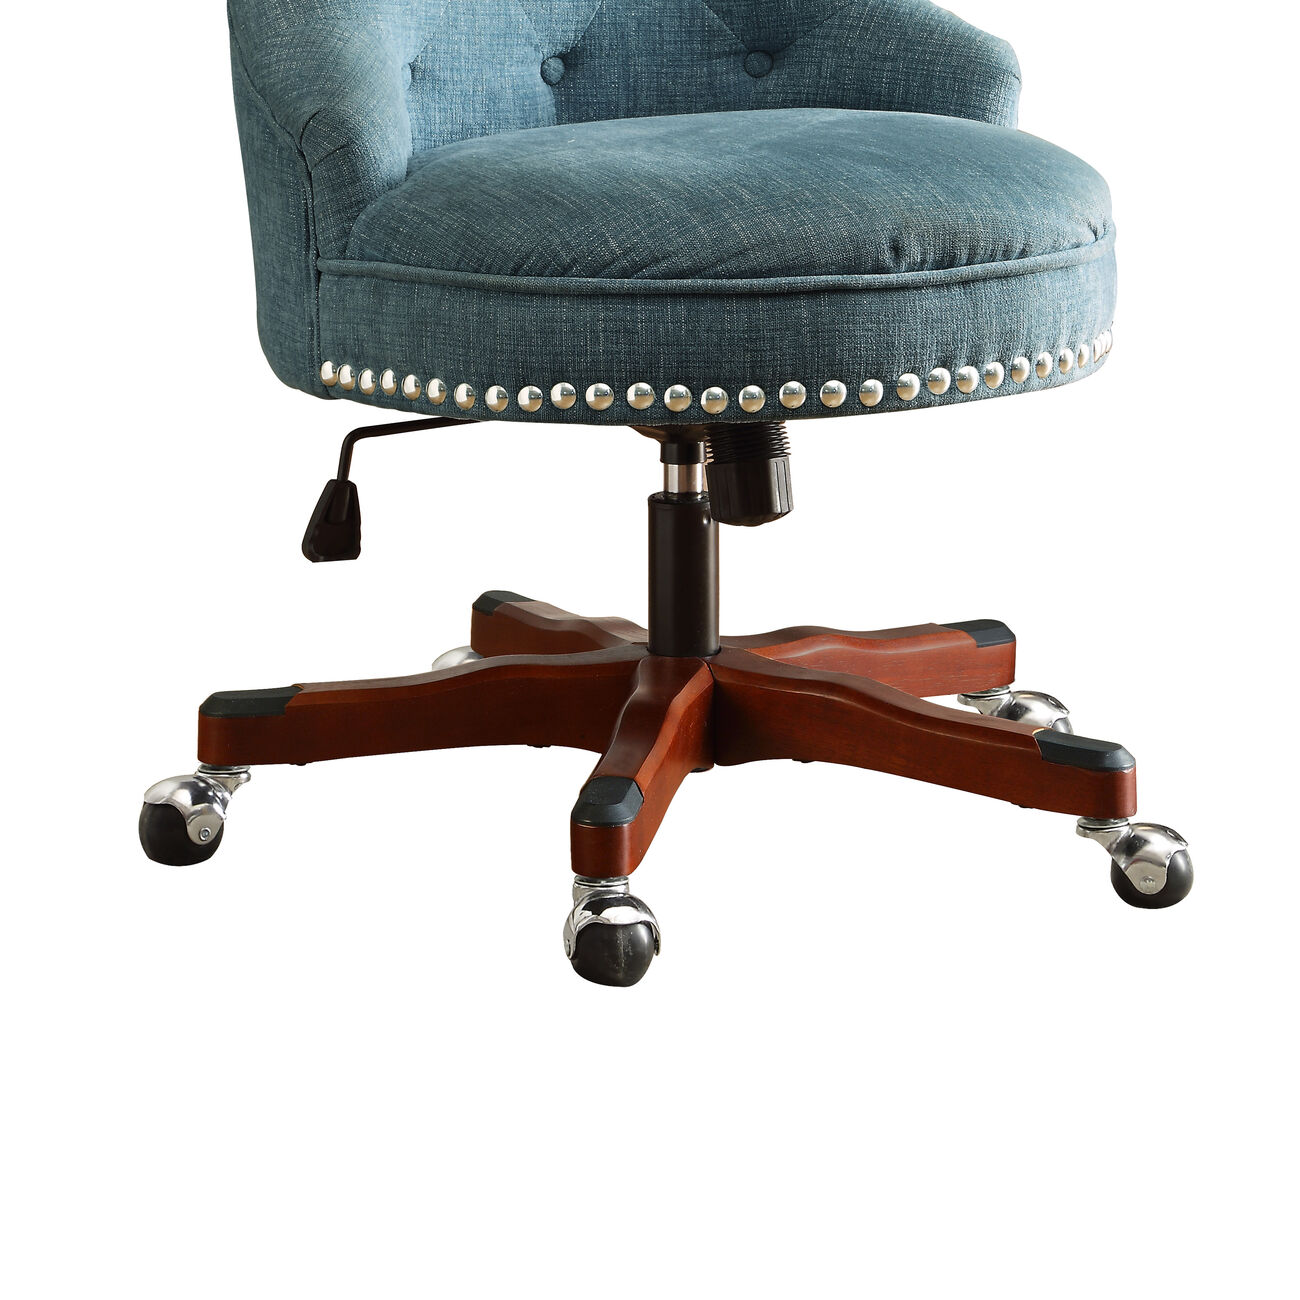 Wooden Swivel Office Chair with Button Tufted Backrest, Blue and Brown